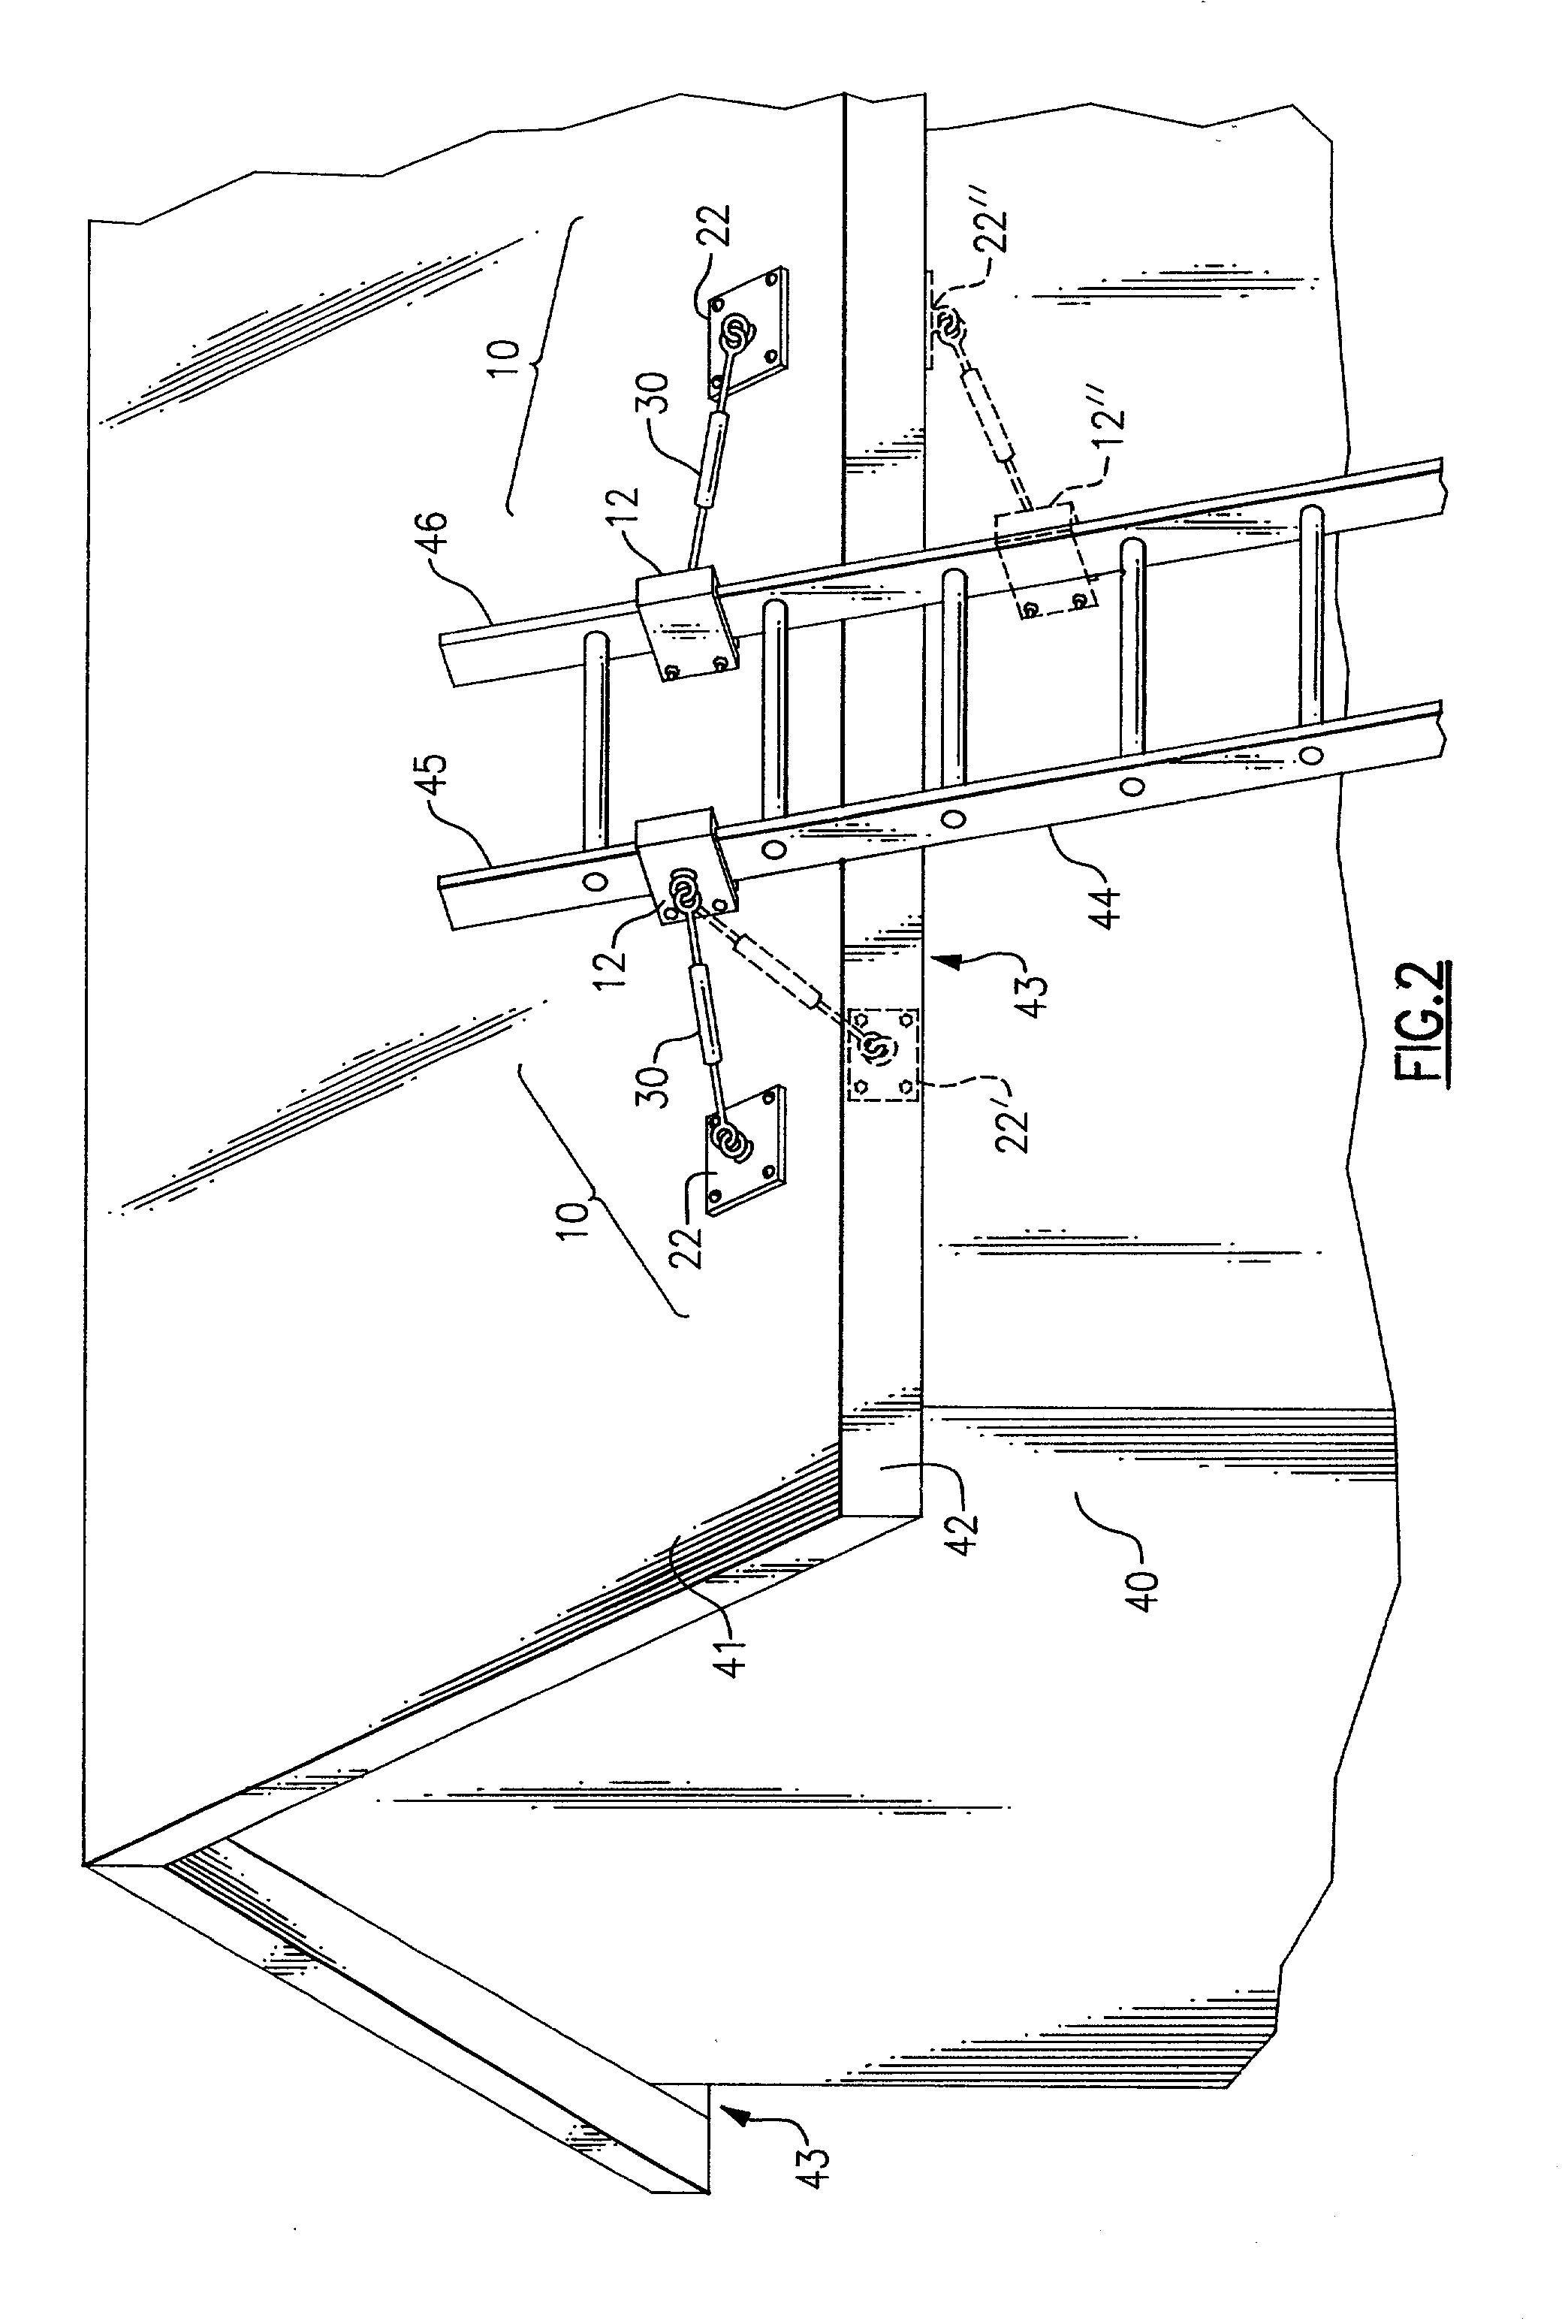 Apparatus for securing ladder to building structure